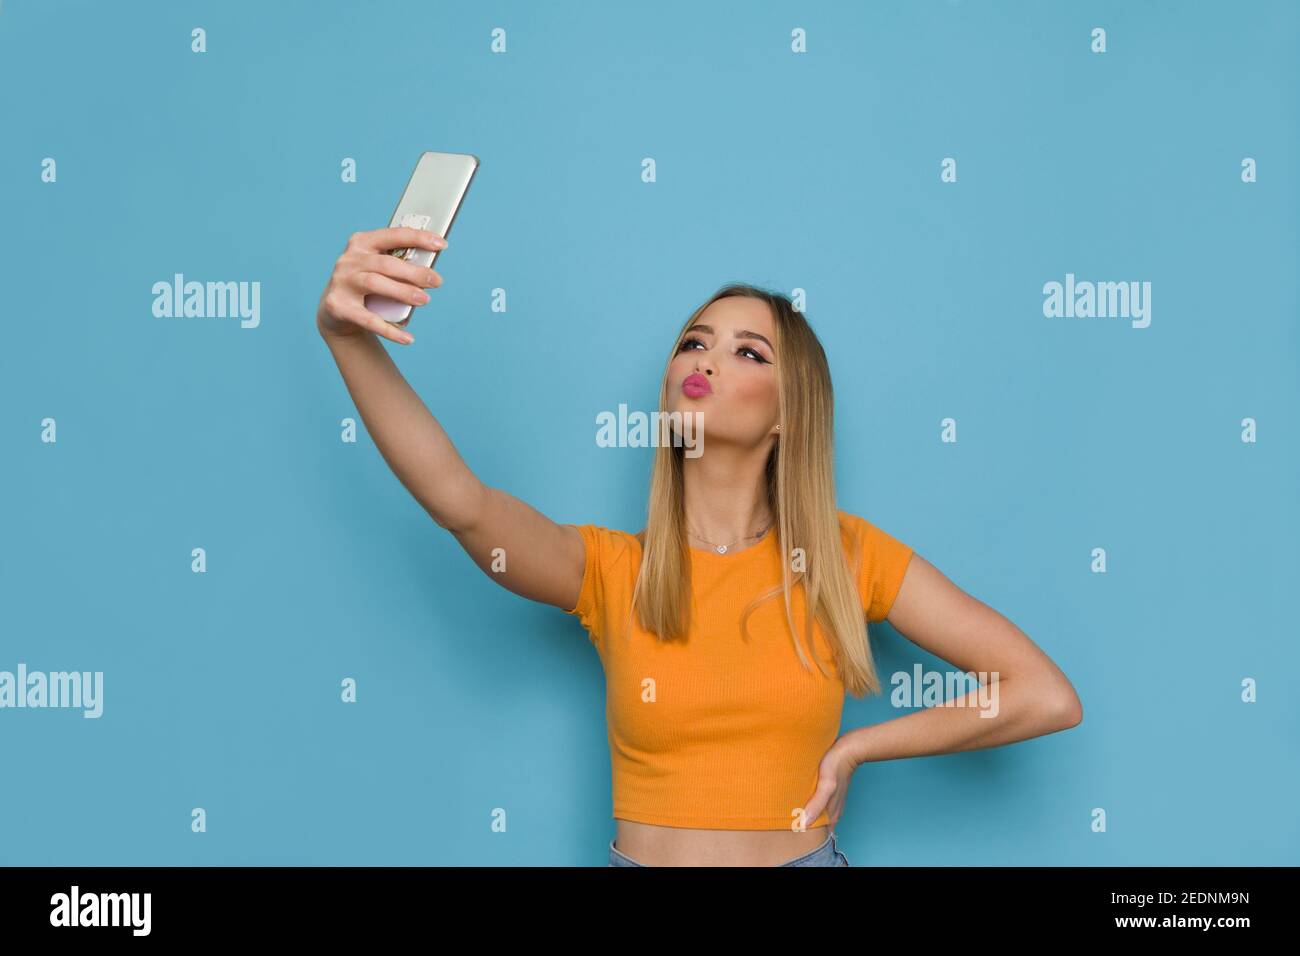 Cute woman in orange top is holding telephone, taking a selfie and sending a kiss. Waist up studio shot on blue background. Stock Photo